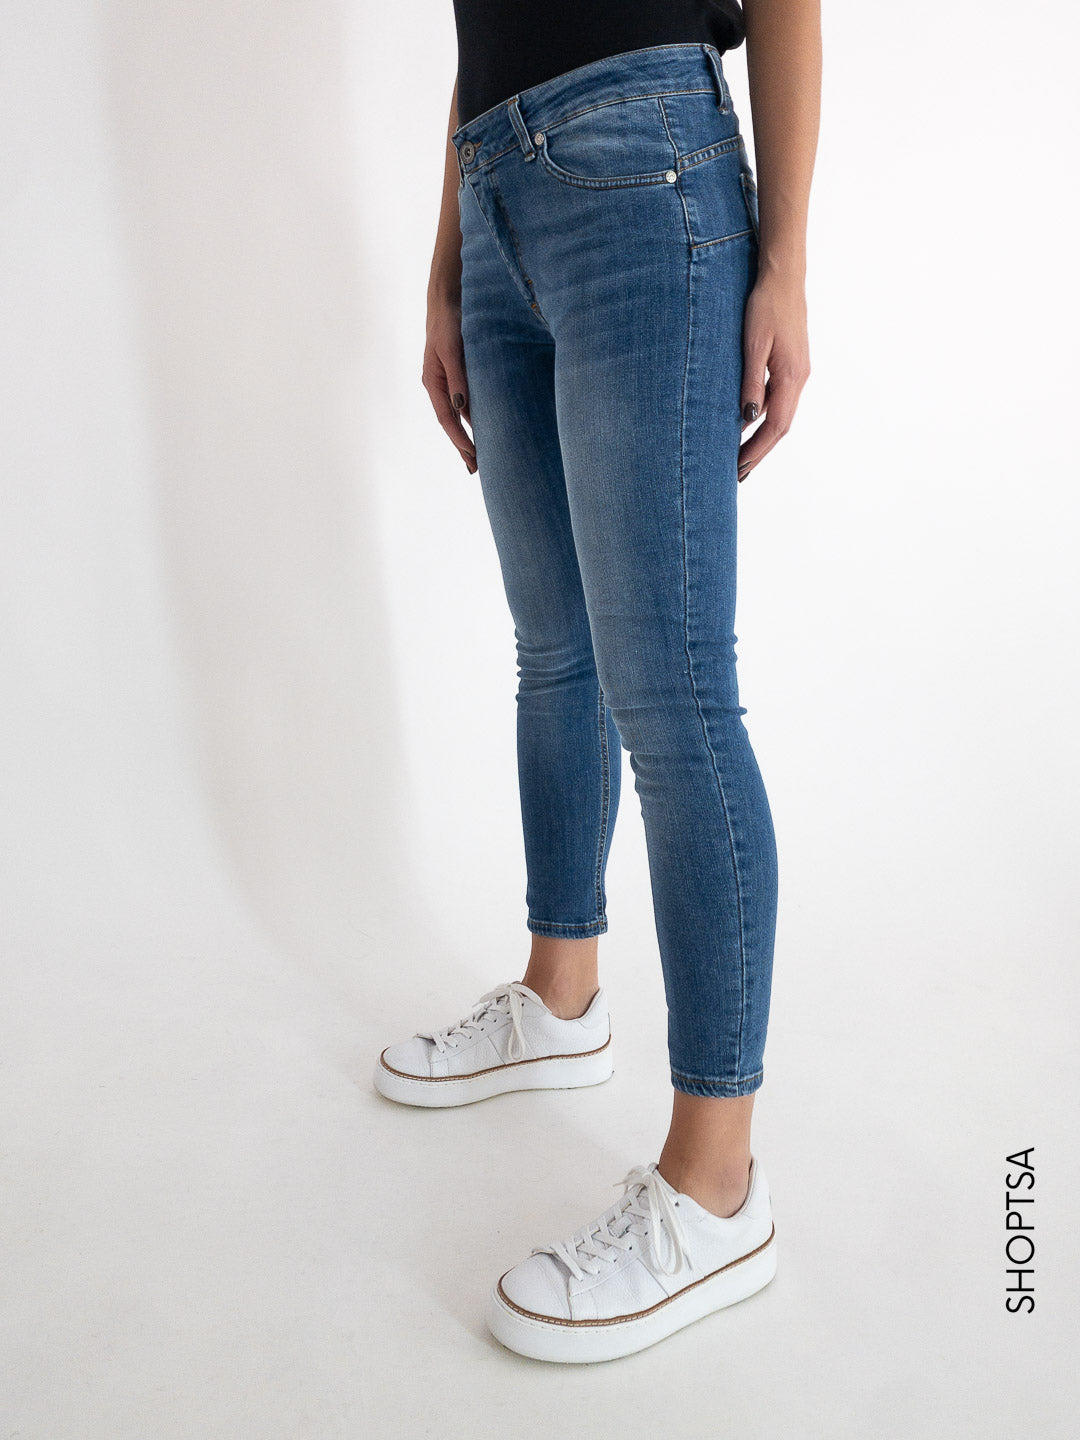 Stretch skinny jeans - Cliver Jeans